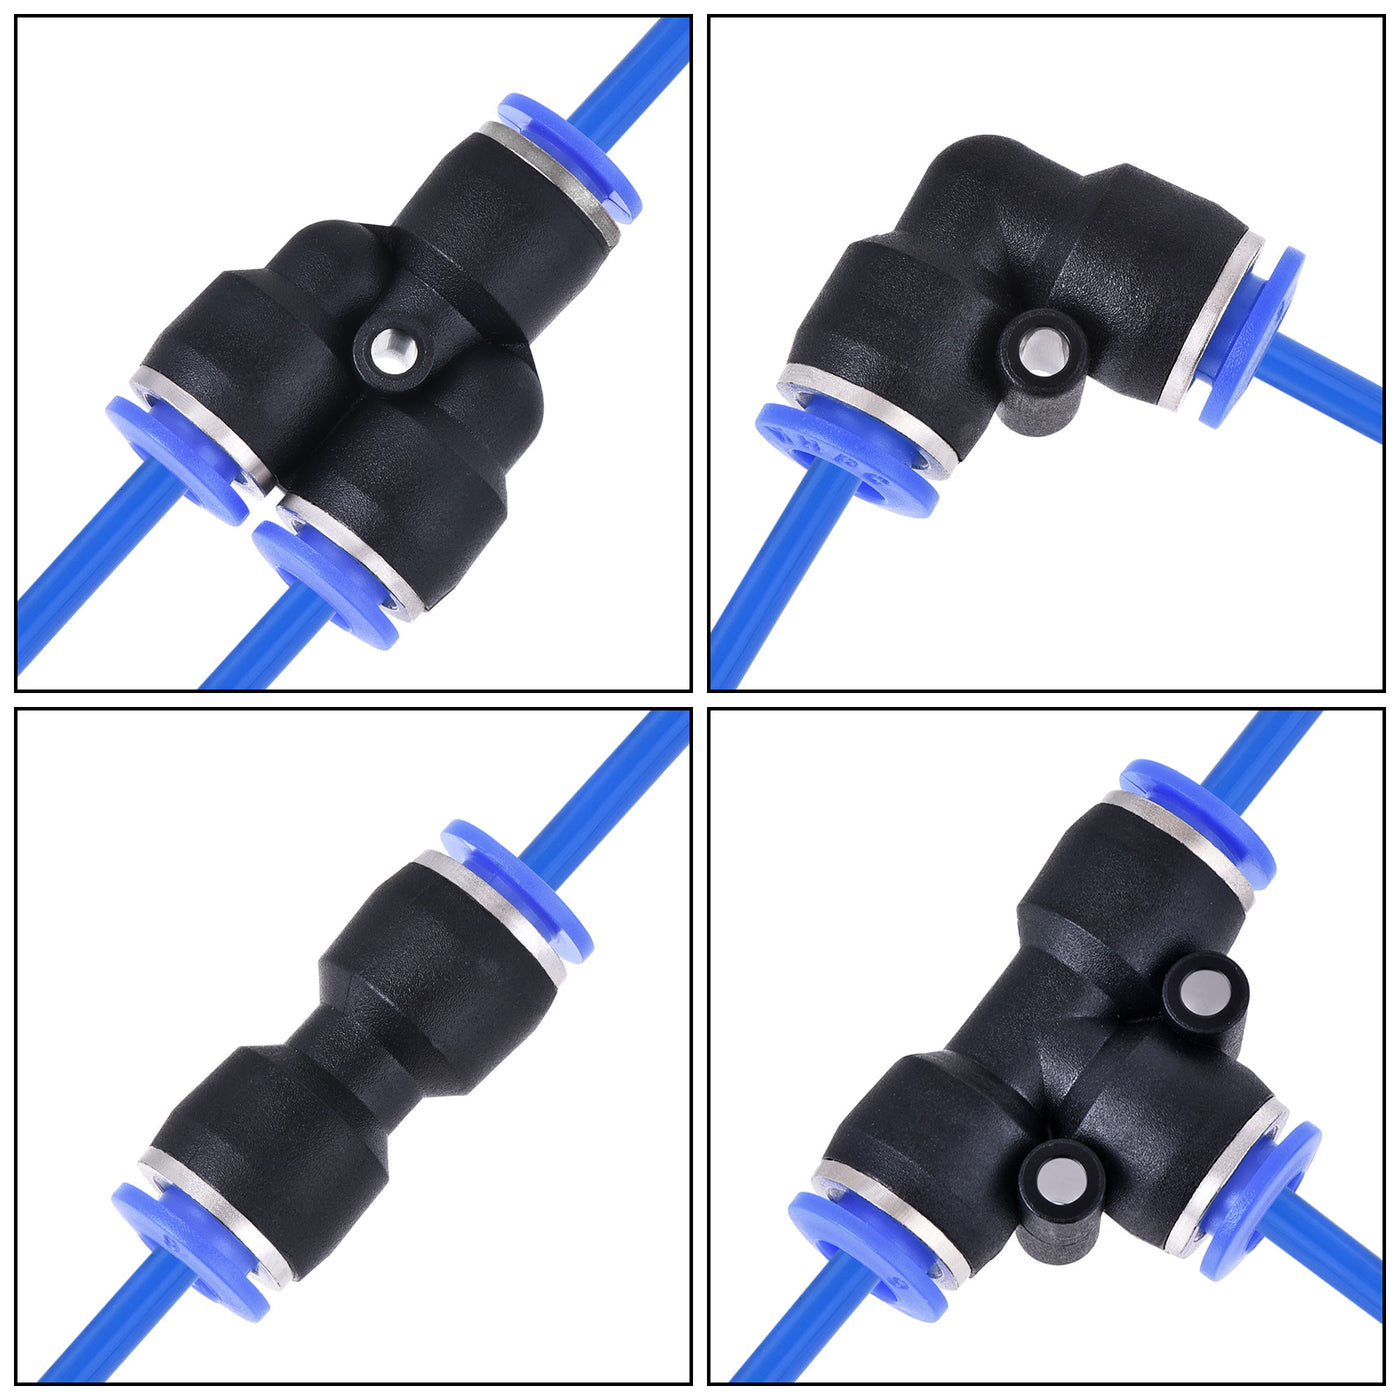 uxcell Uxcell Pneumatic PU Air Tubing Kit with Push to Connect Fittings for Air Hose Line Pipe 6mm OD 10 Meters Blue